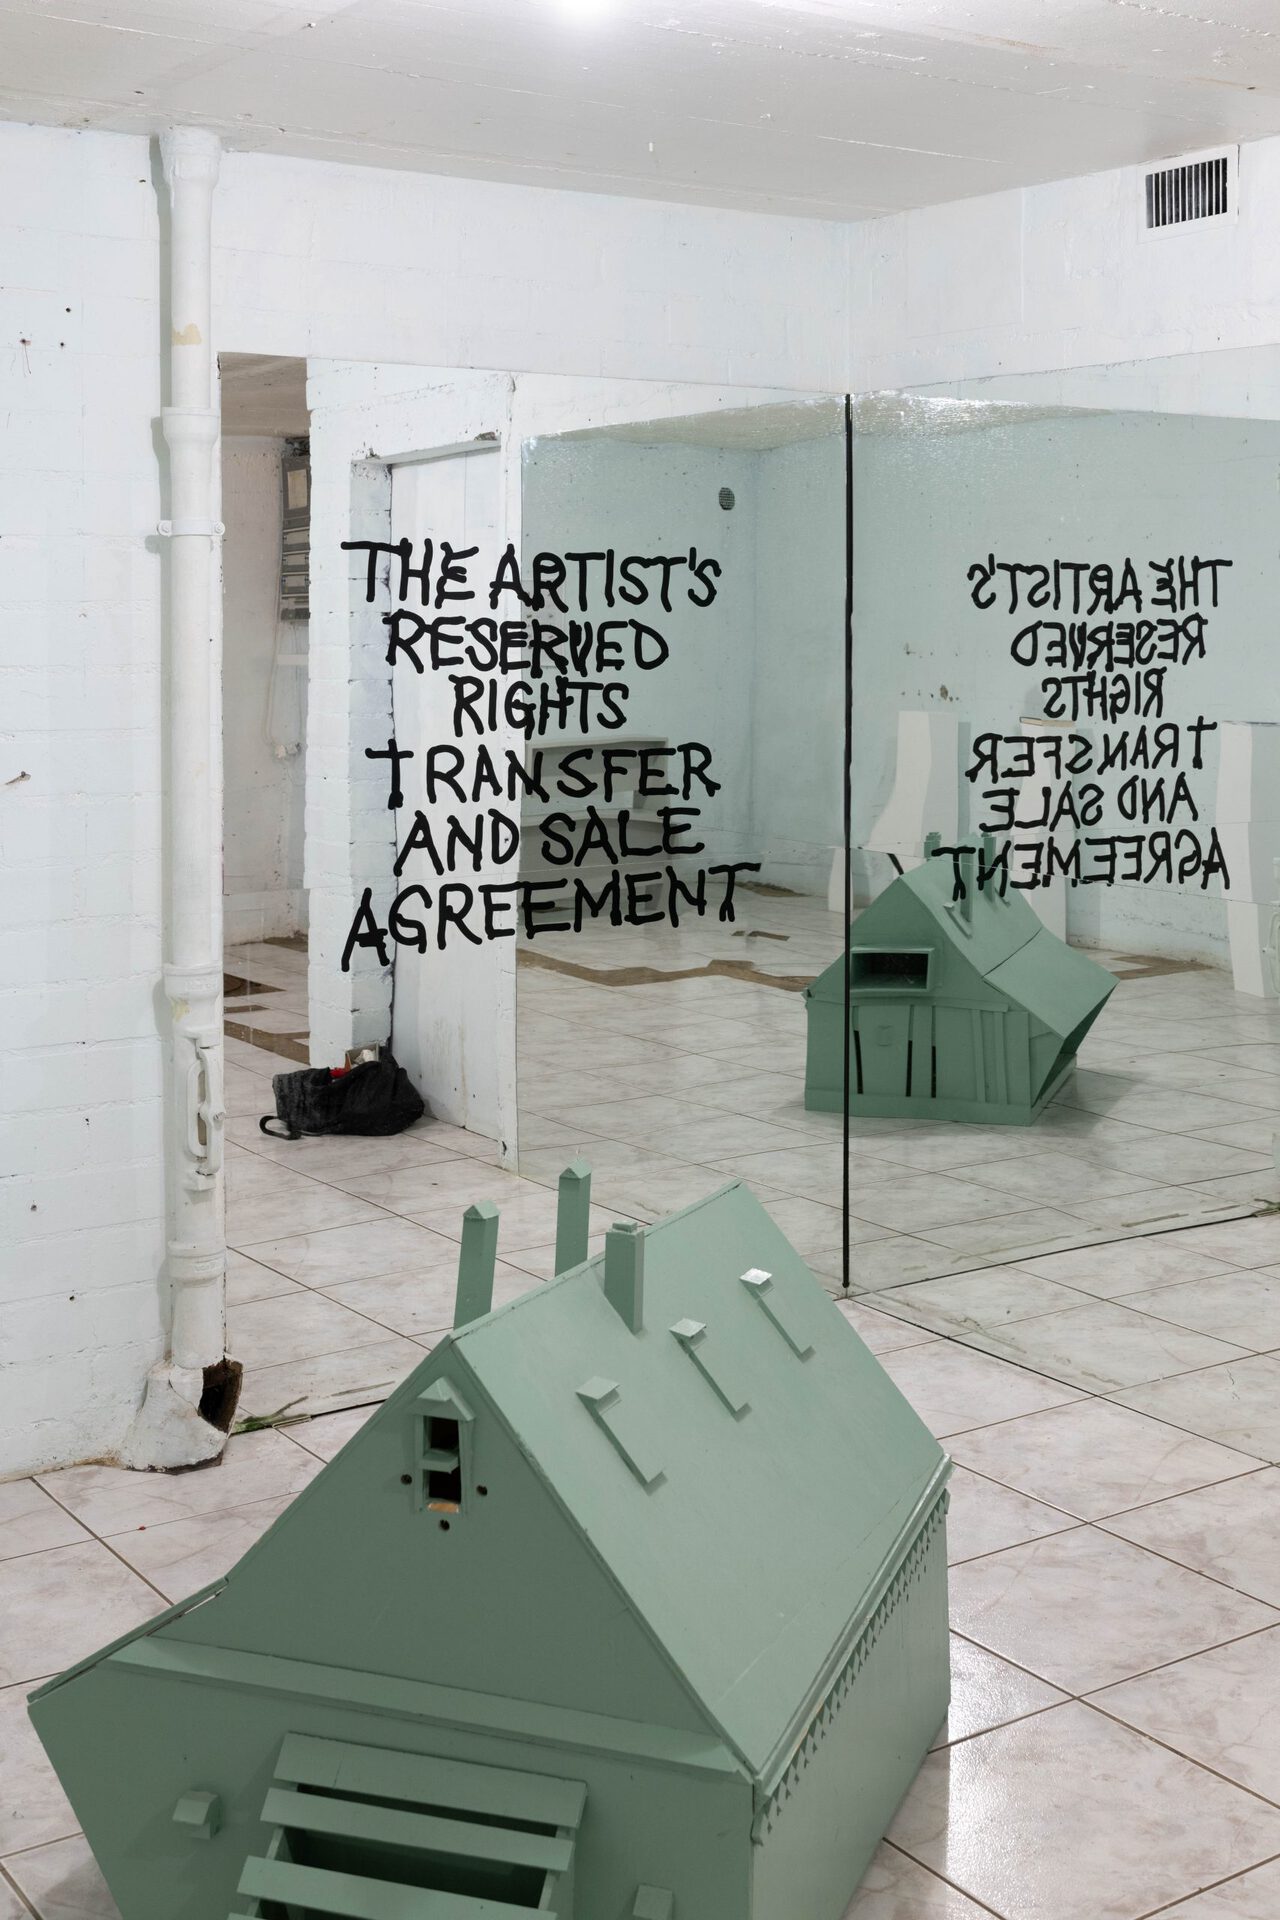 Seth Siegelaub, The Artist‘s Reserved Rights Transfer and Sale Agreement (also known as the Artist‘s Contract), 1971